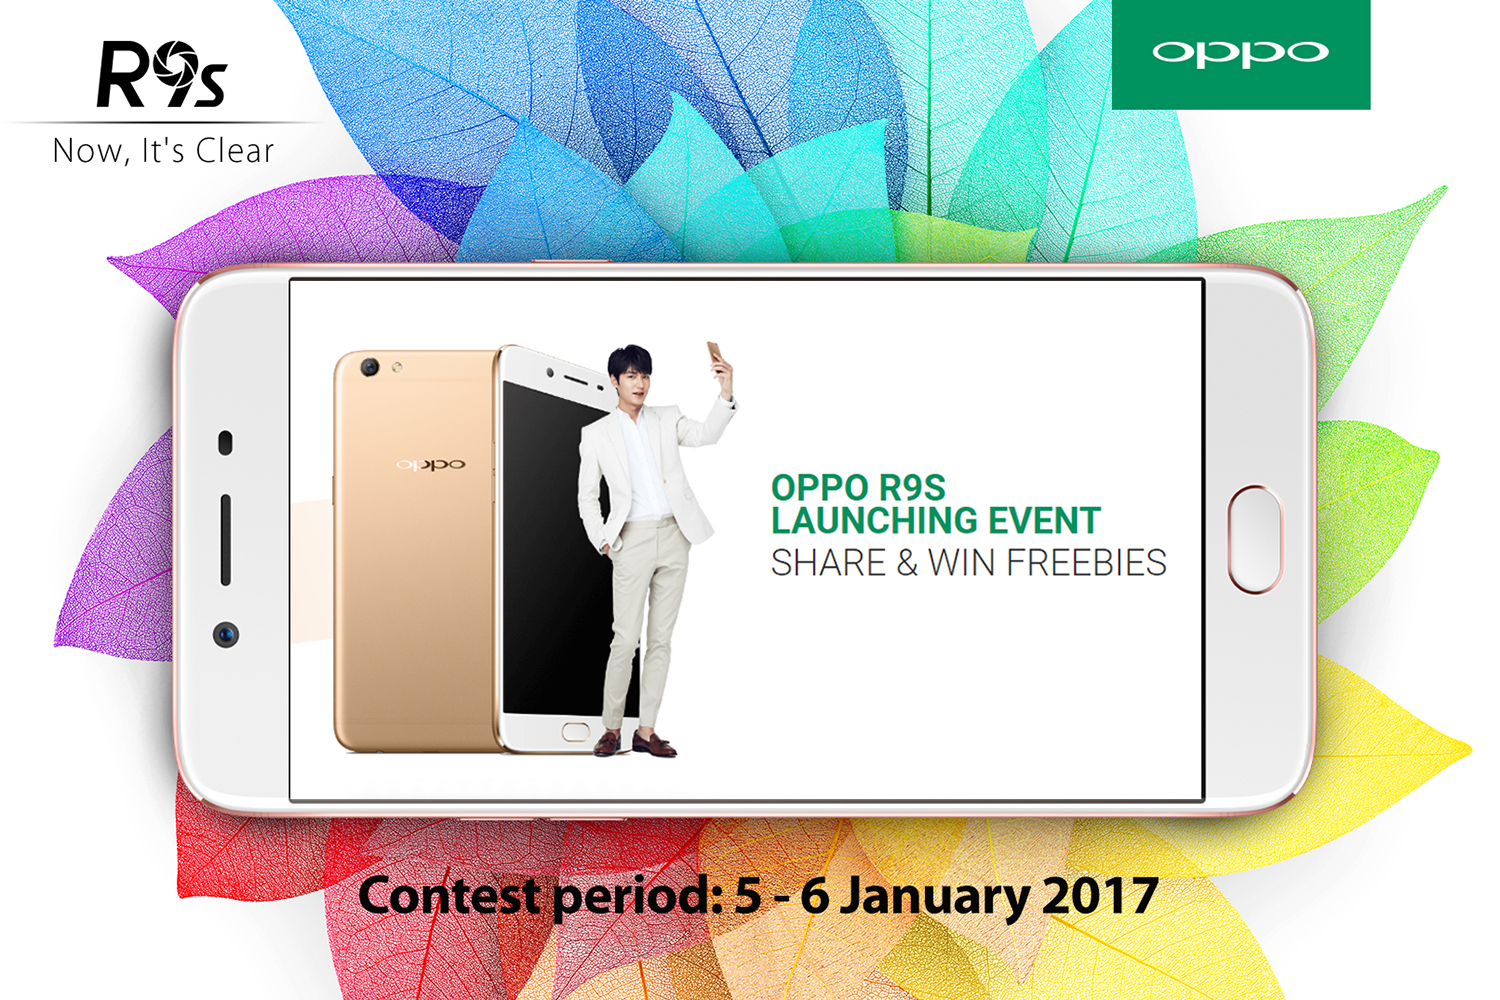 Watch the OPPO R9s Launch Live and Win Prize